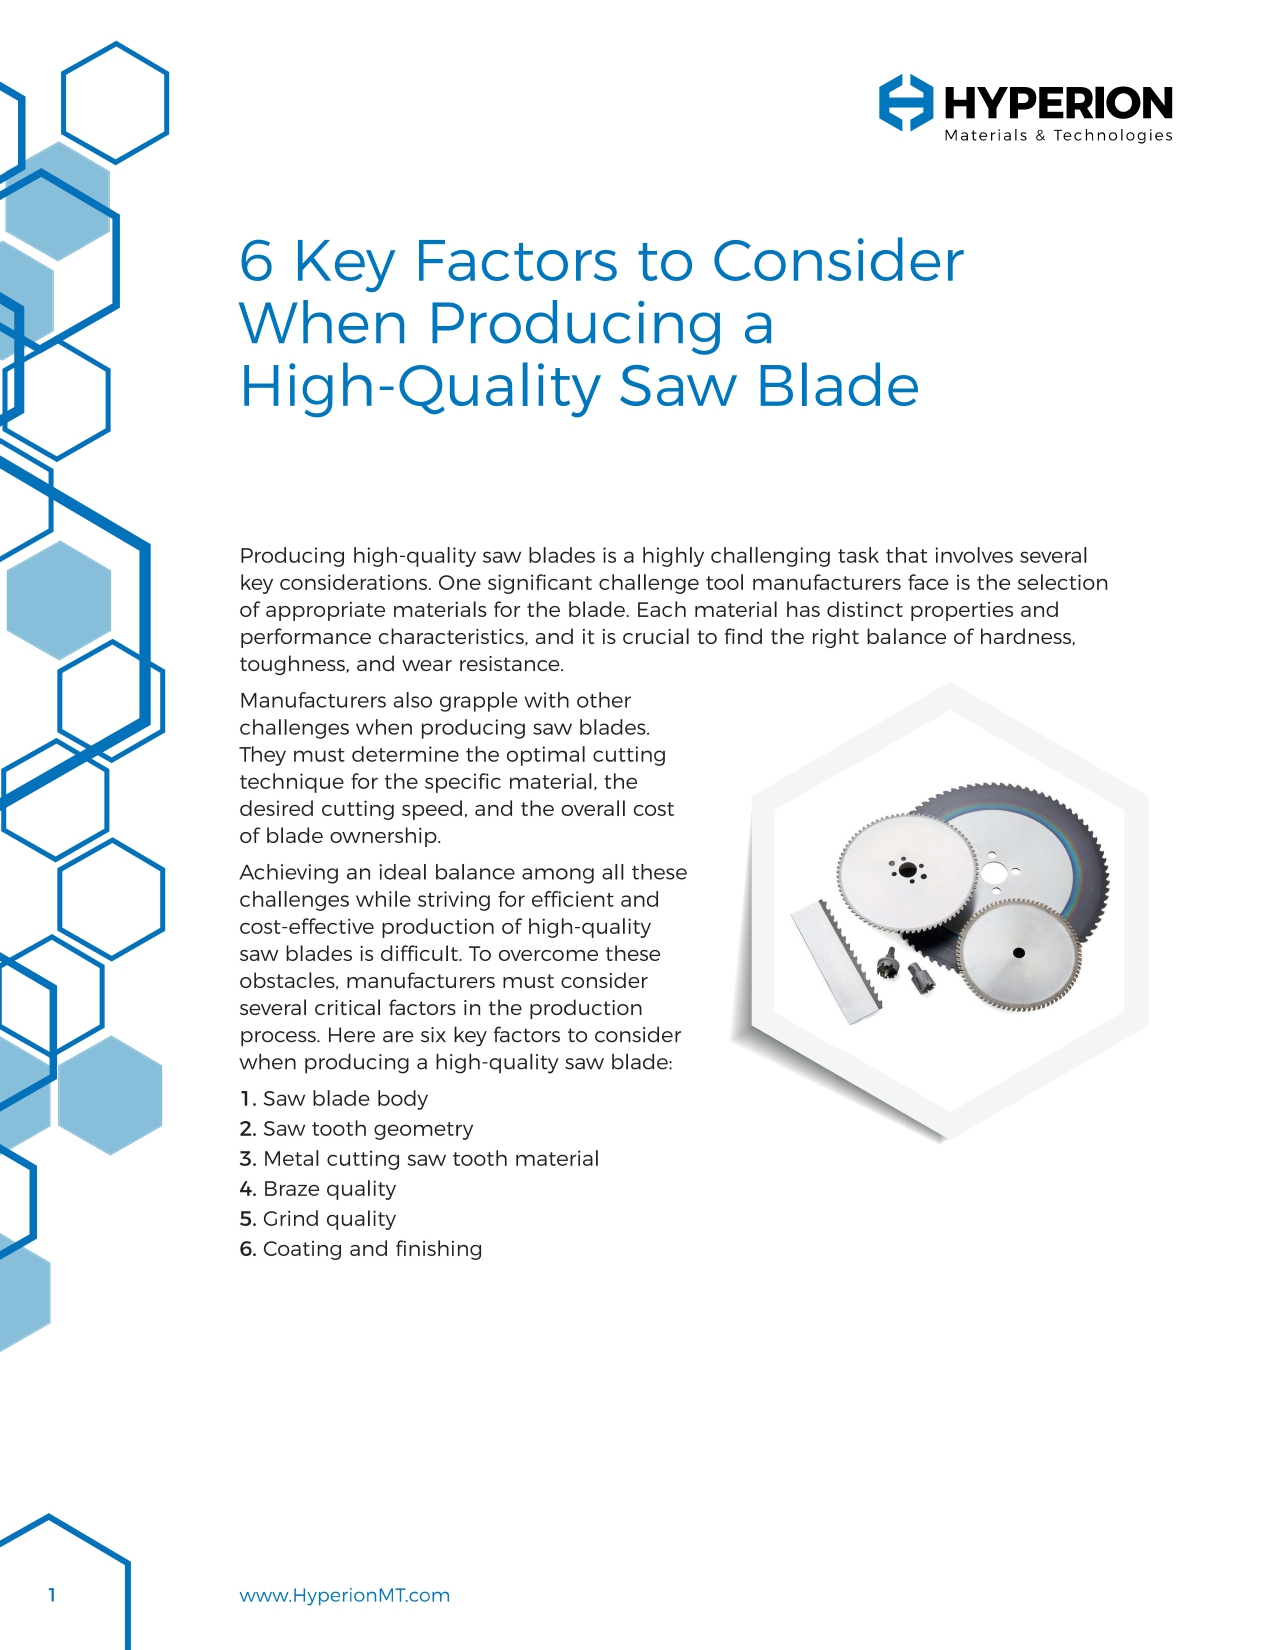 6 Key Factors to Consider When Producing a High-Quality Saw Blade